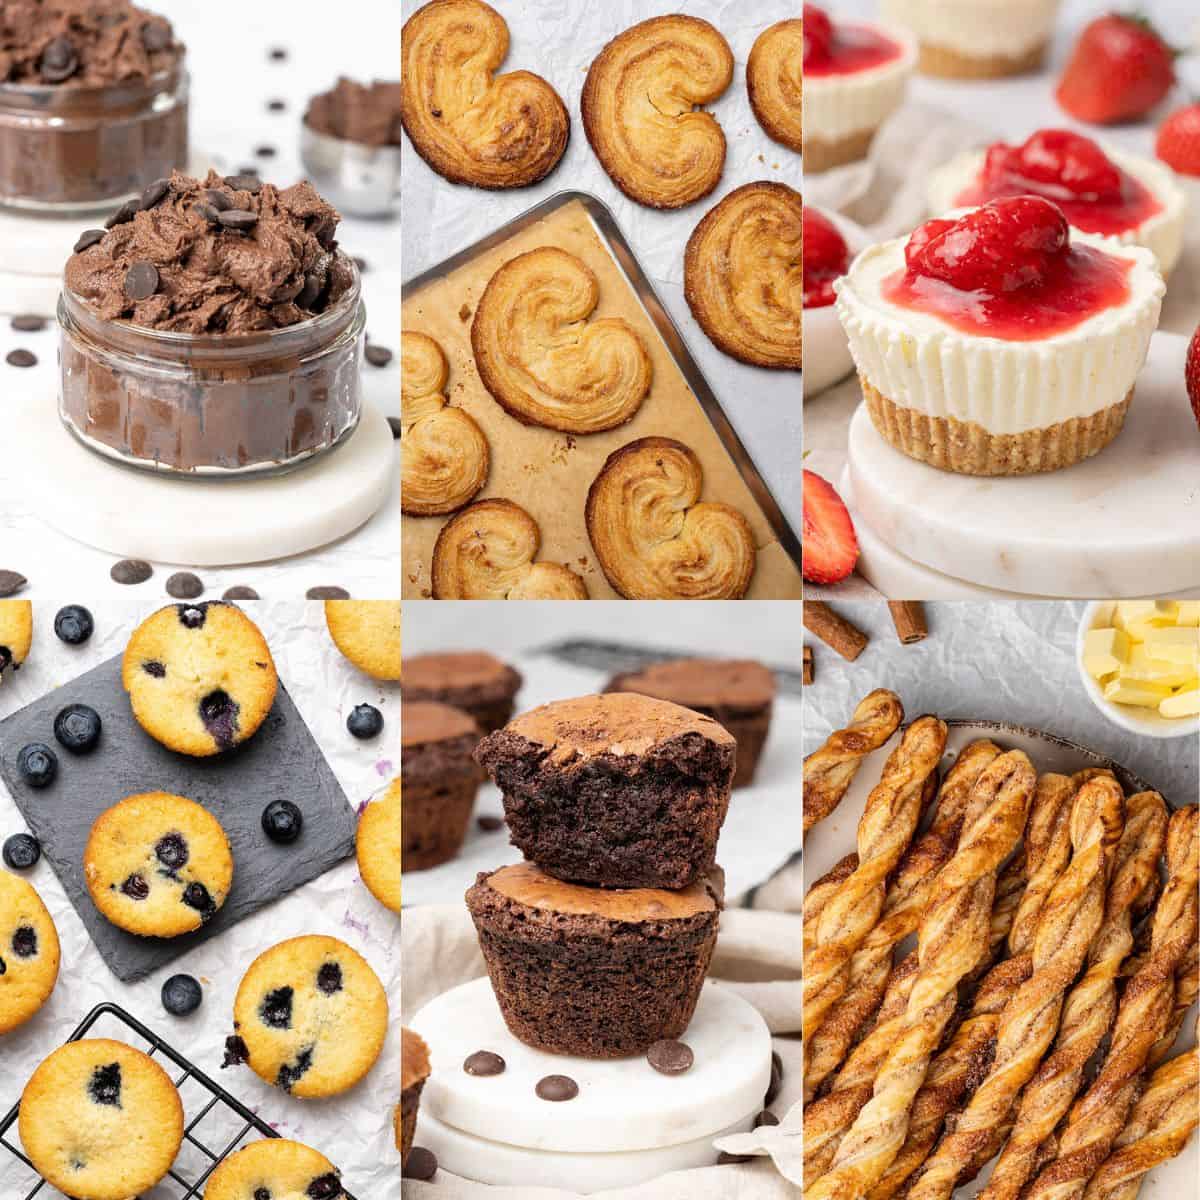 <p>Baby bakers can have fun with these easy <strong><a href="https://www.spatuladesserts.com/easy-dessert-recipes-for-kids/">dessert recipes for kids </a></strong>that are tasty as well as simple to create! Encourage your kids to become pros in the kitchen from a young age with these delicious sweet treats.</p><p><strong>Go to the recipes: <a href="https://www.spatuladesserts.com/easy-dessert-recipes-for-kids/">Dessert Recipes for Kids</a></strong></p>